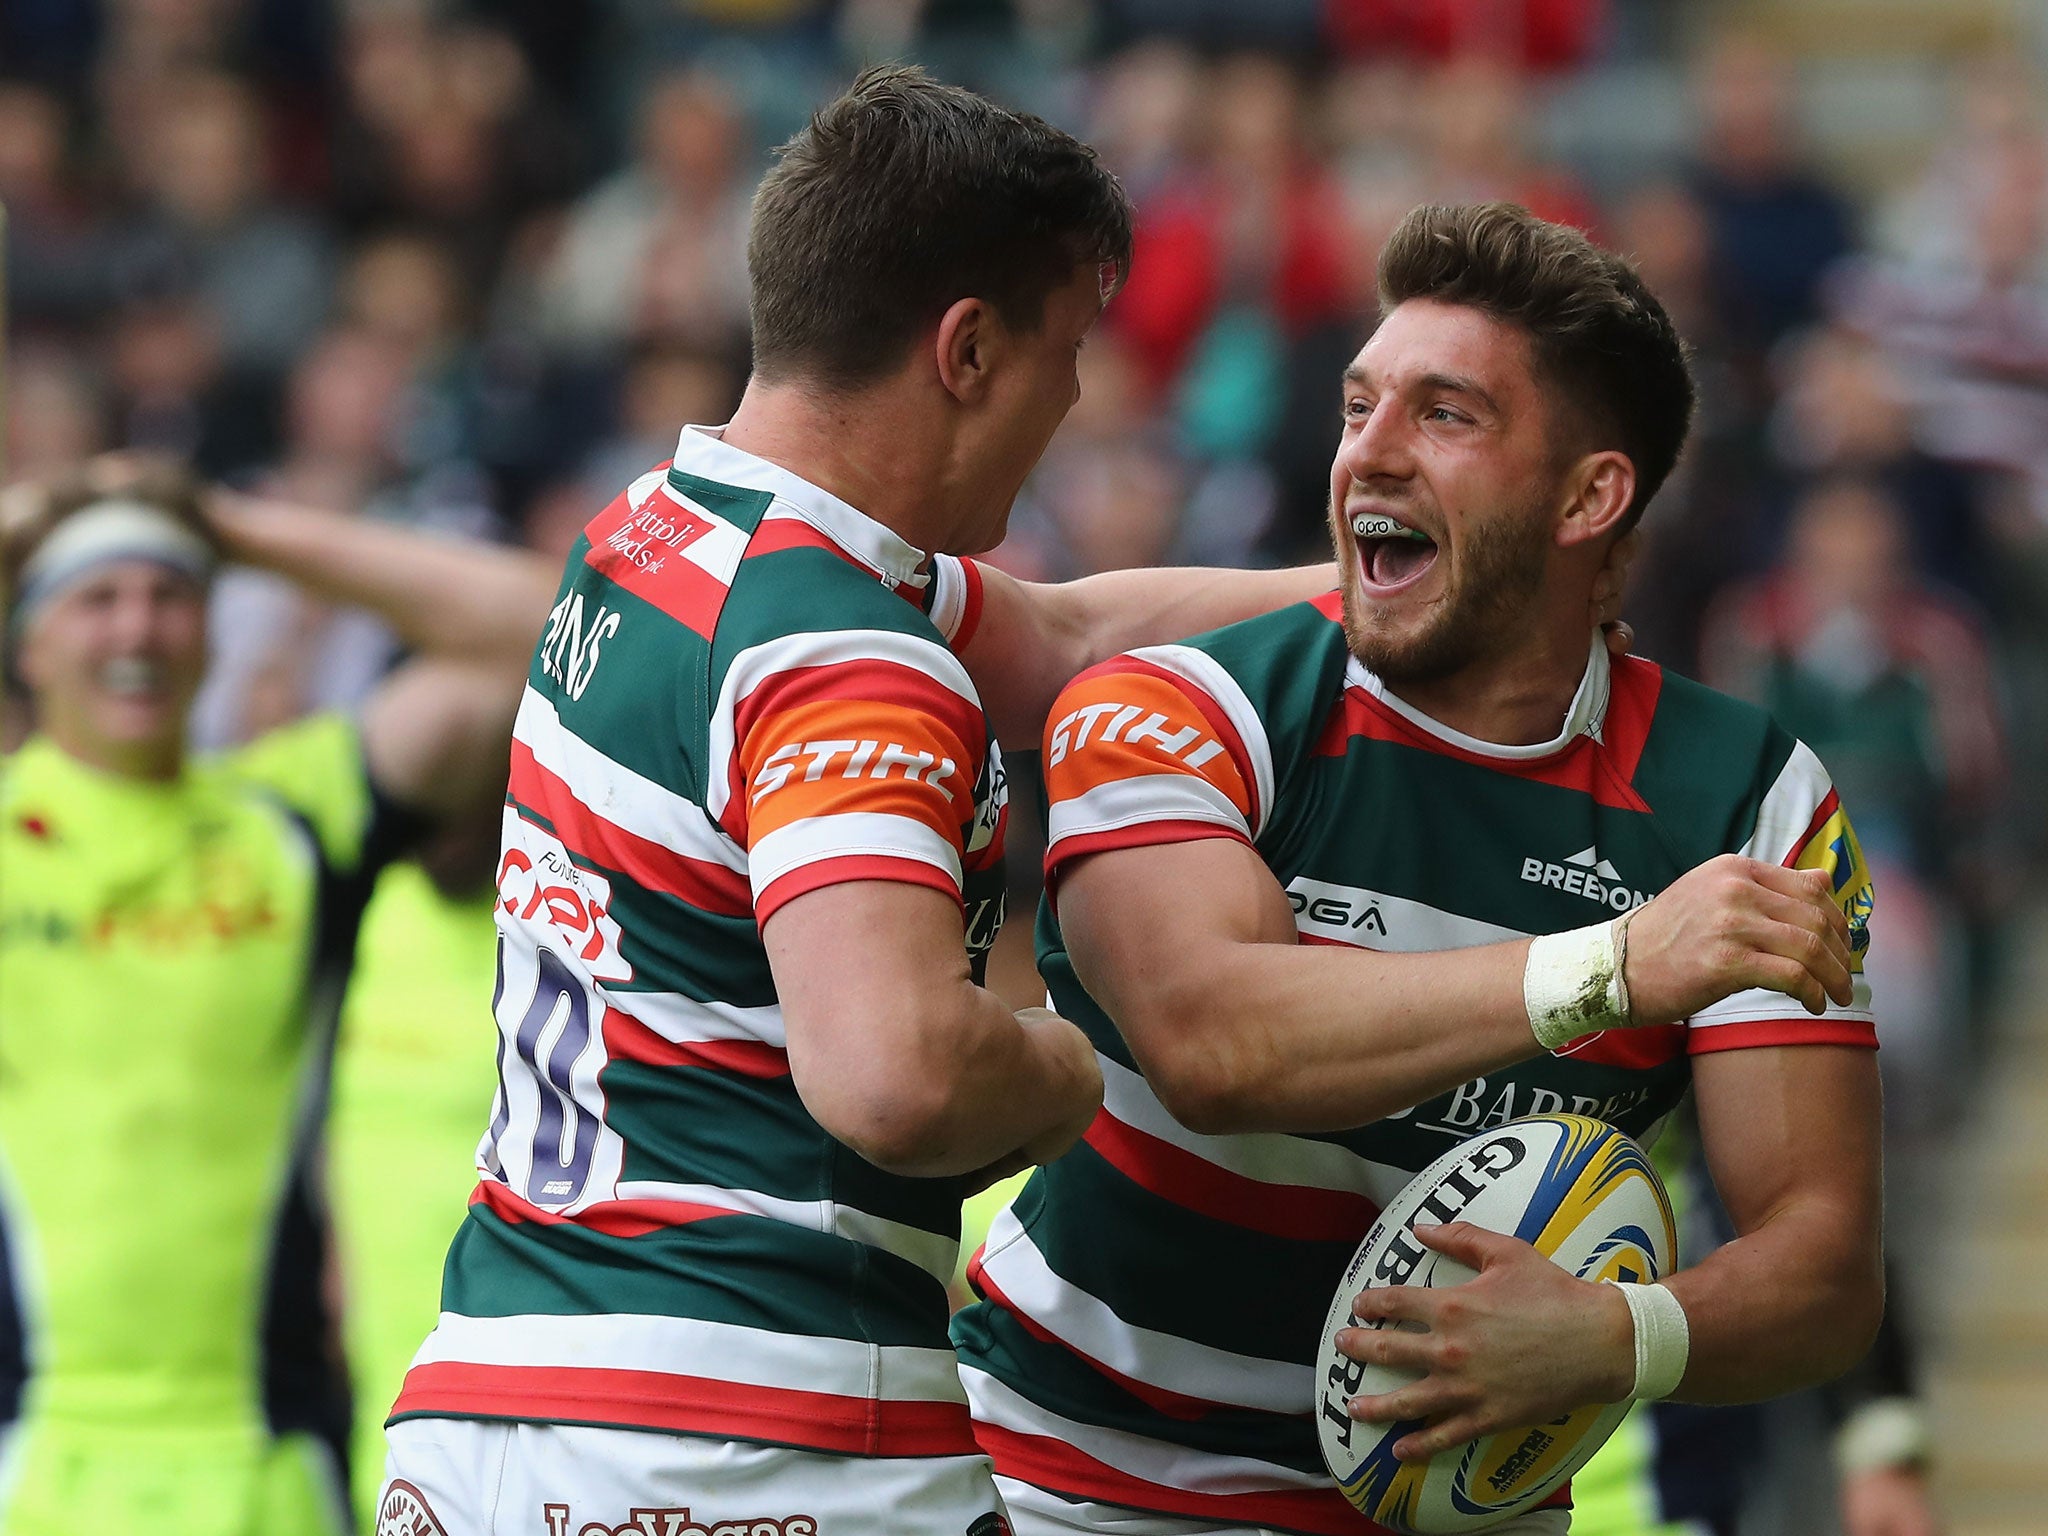 Owen Williams celebrates after scoring a try for Leicester against Sale